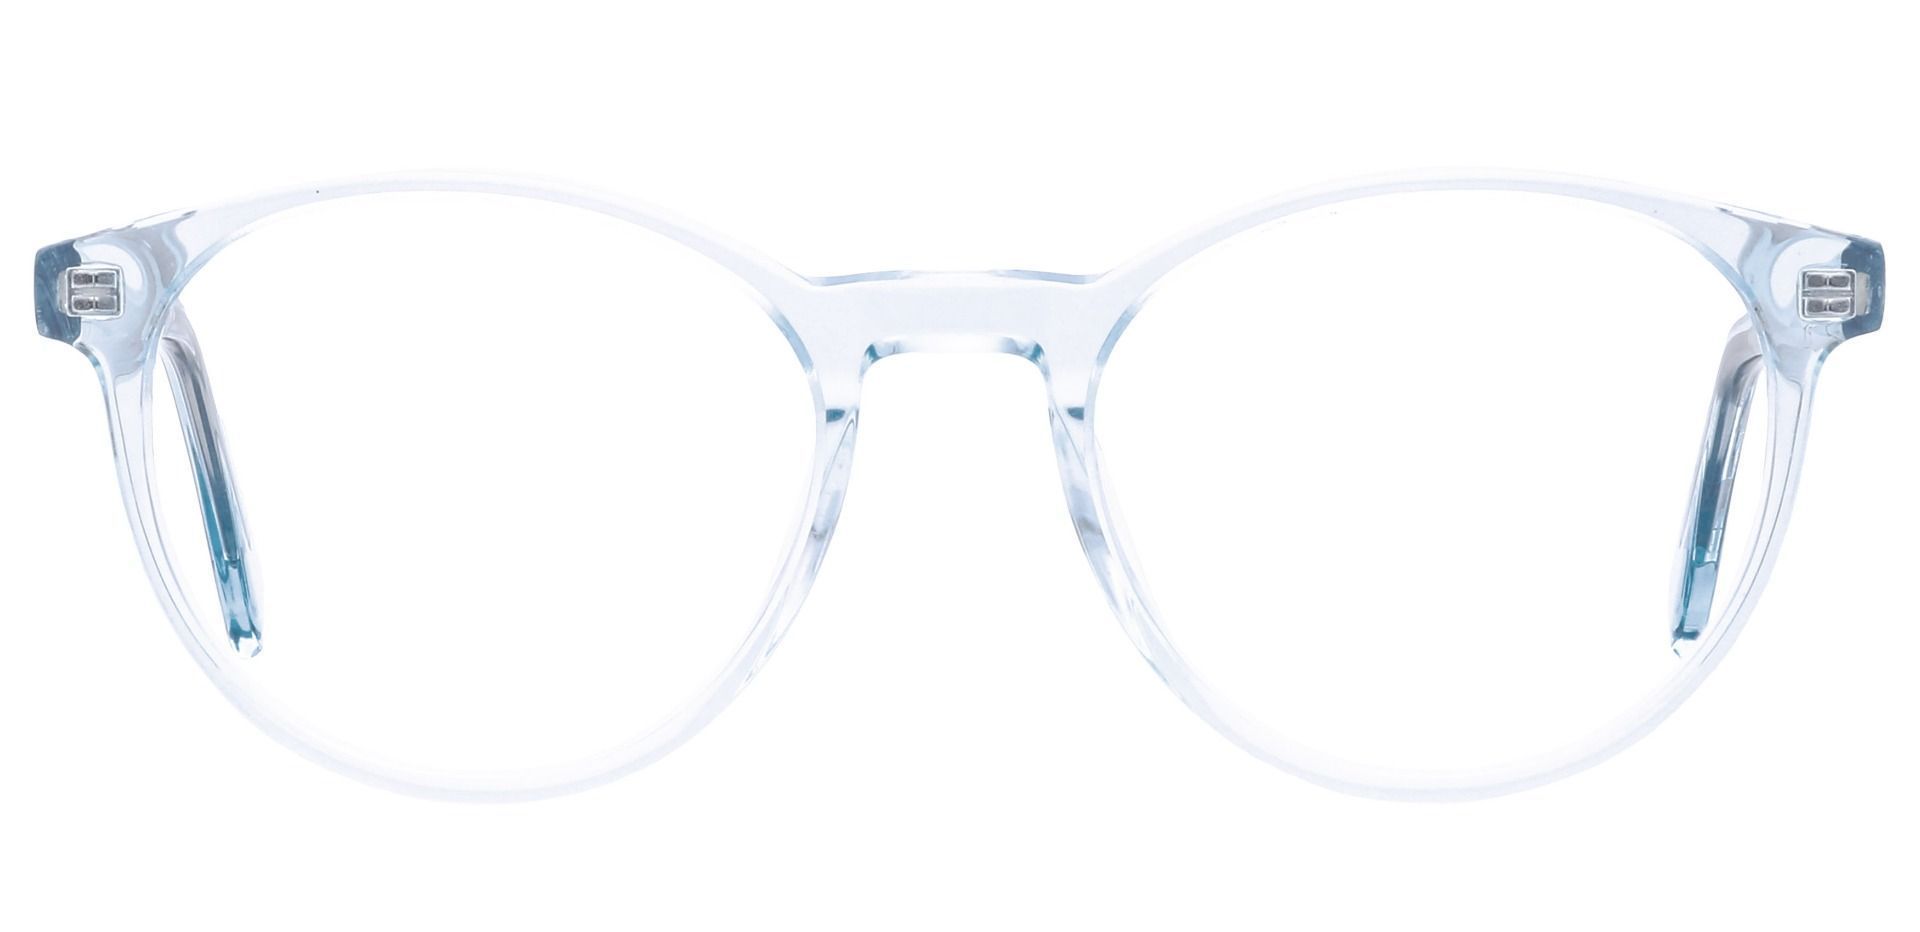 Stellar Oval Prescription Glasses - The Frame Is Clear With Light Blue